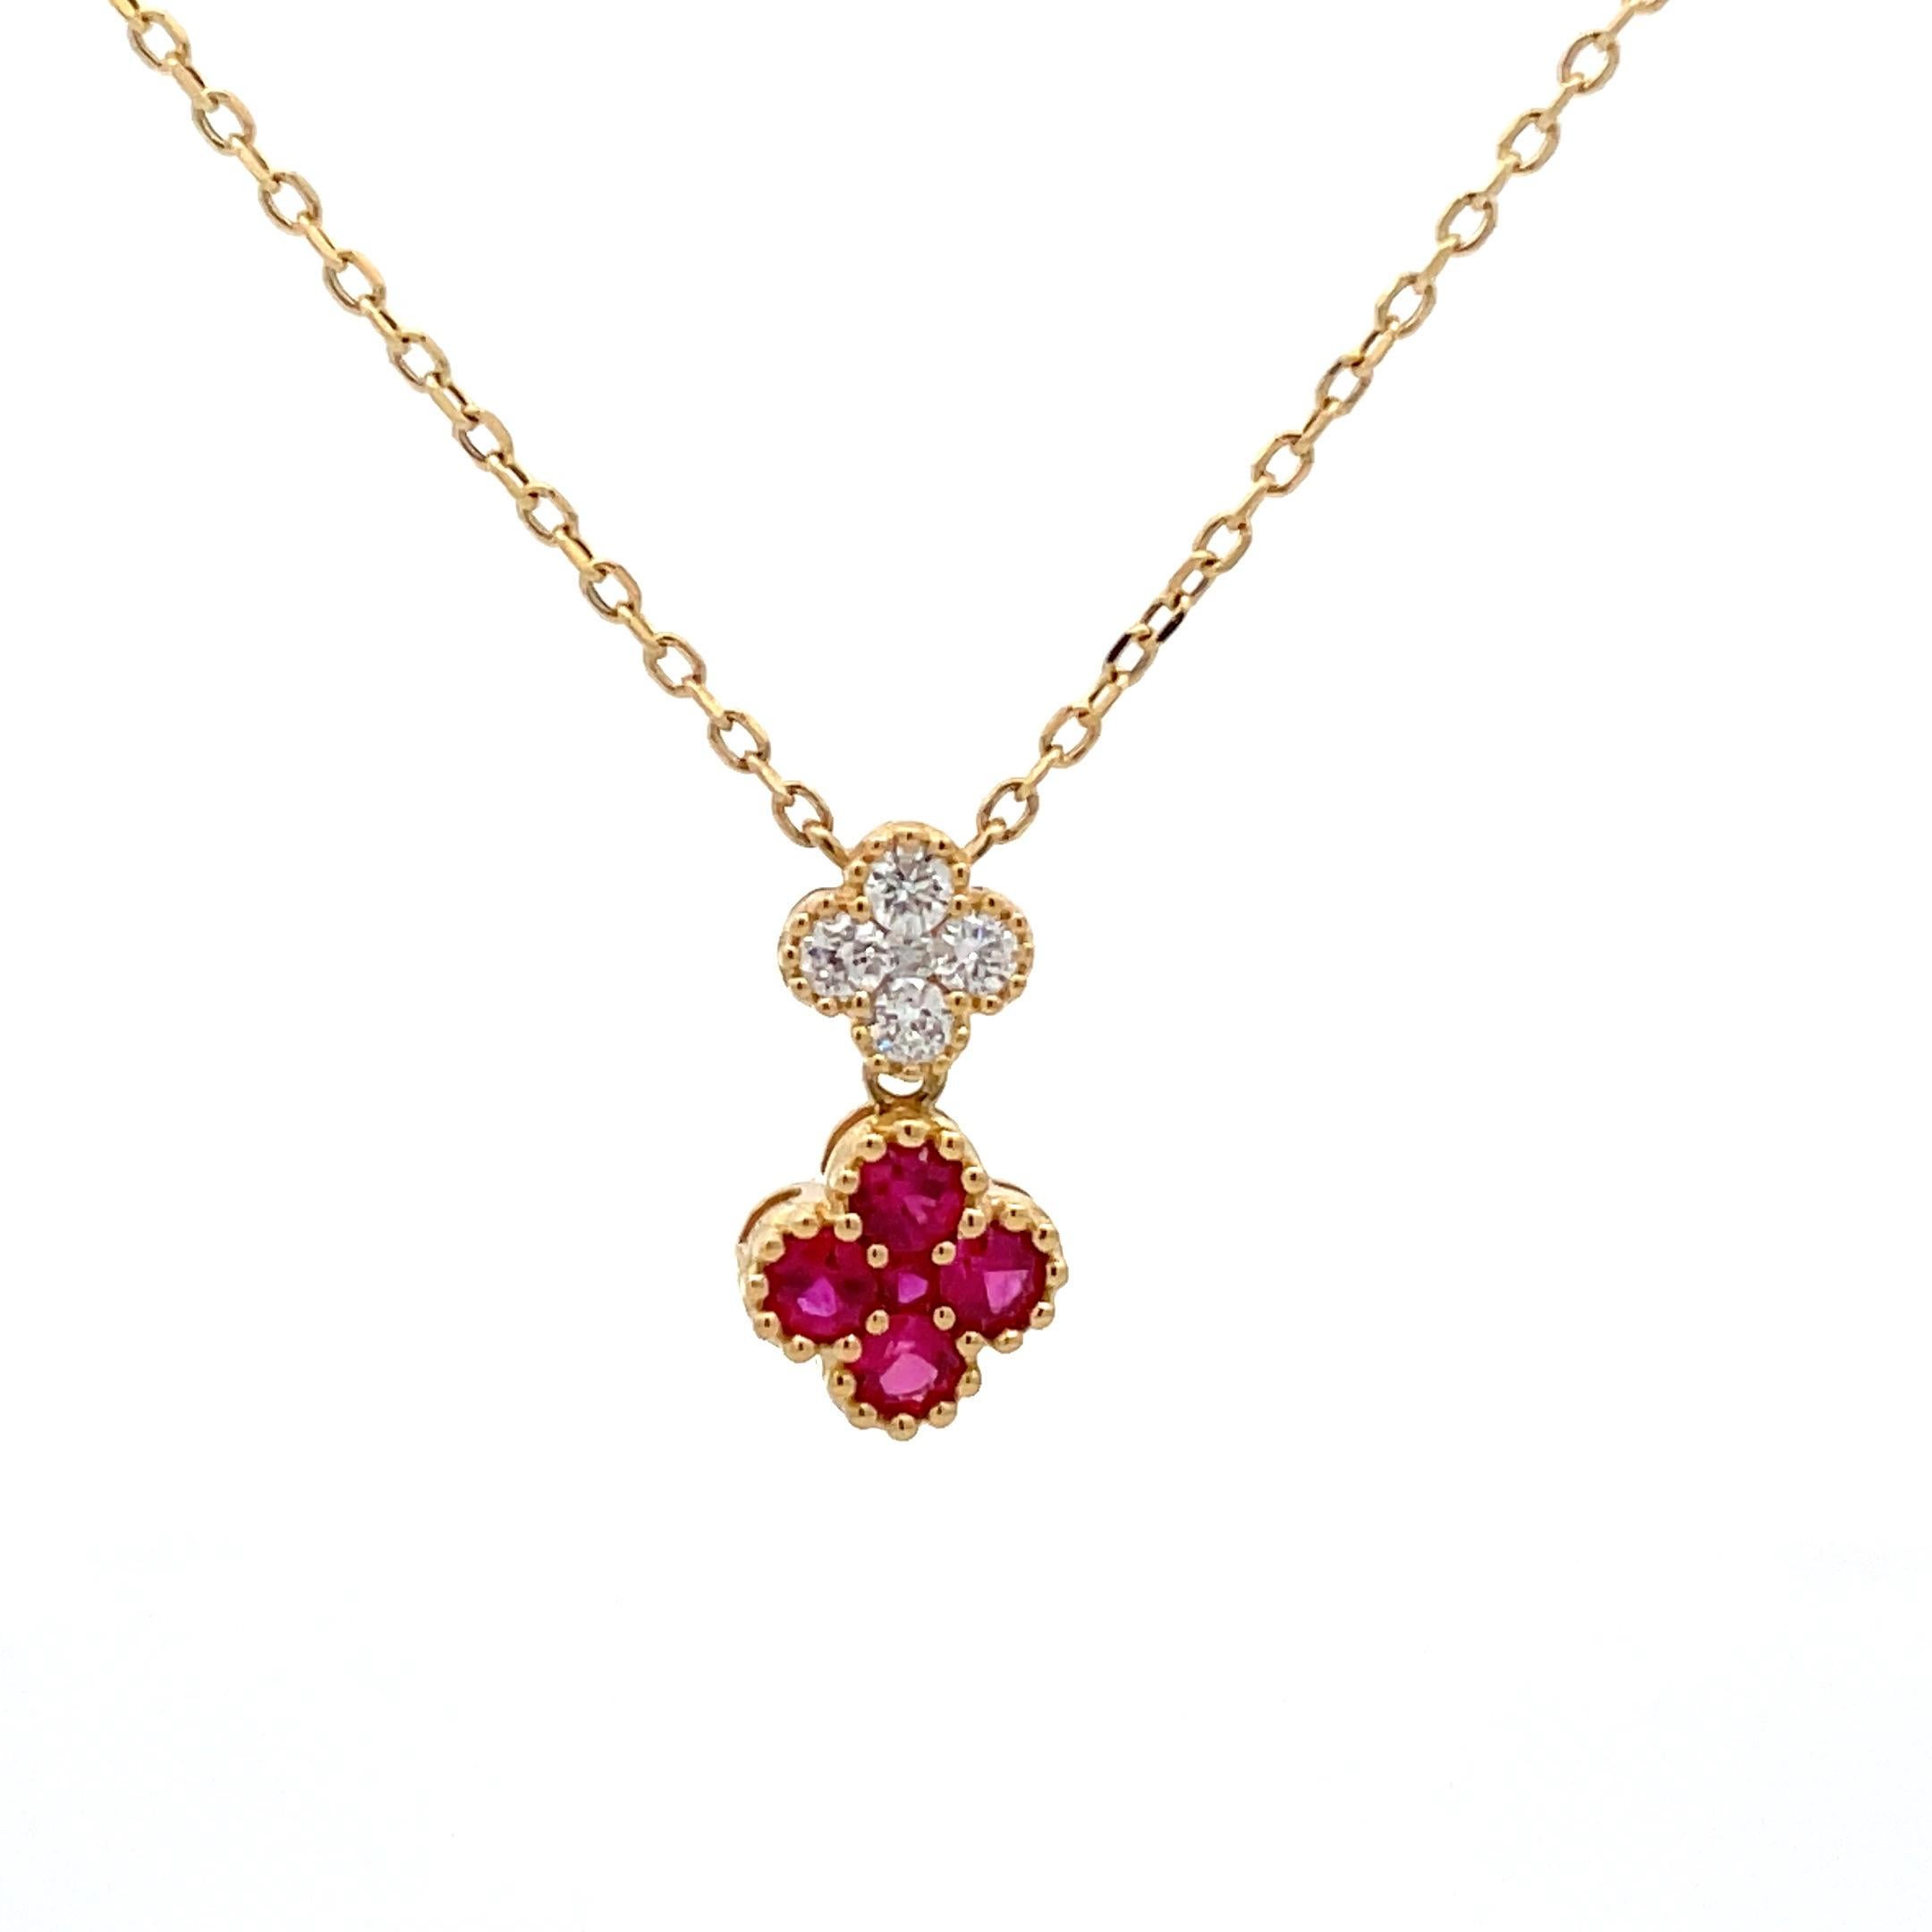 Round Cut Double Cluster Ruby Diamond Pendant Necklace 0.47 Carats 18 Karat Yellow Gold For Sale